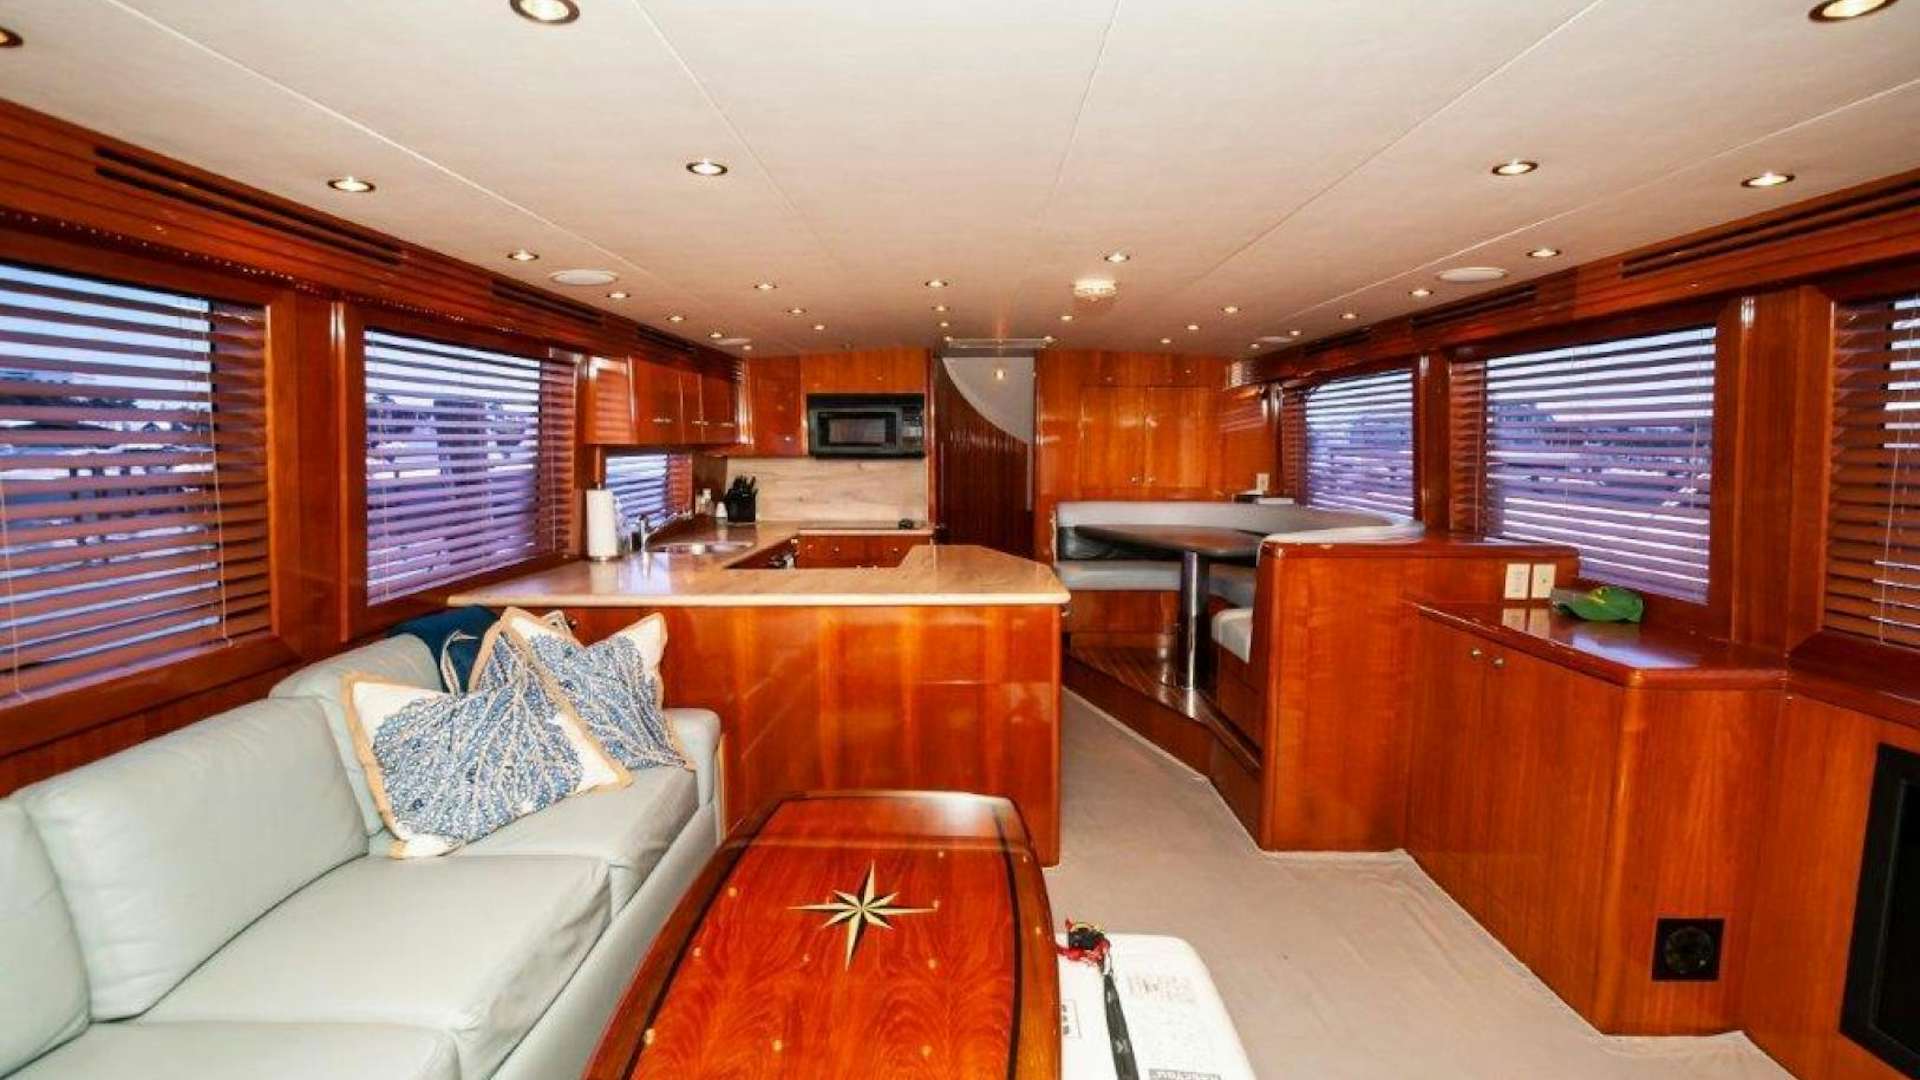 Moontan
Yacht for Sale